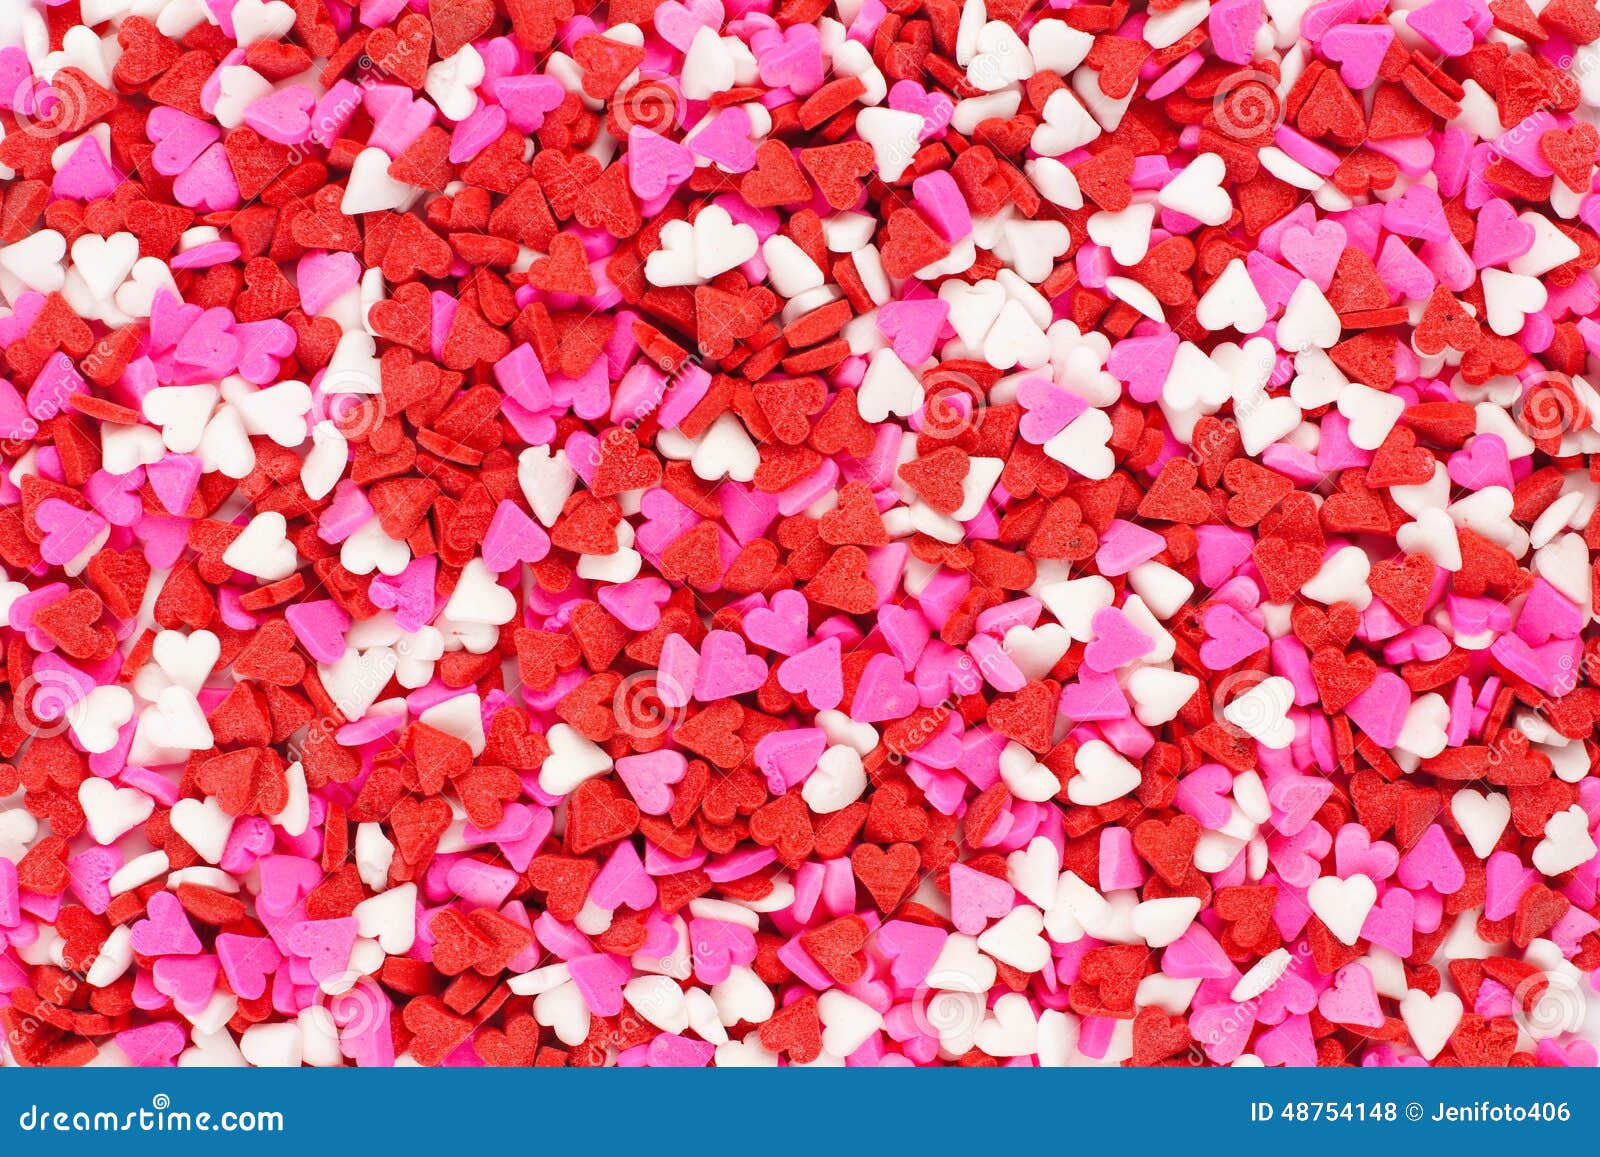 valentines day candy heart background